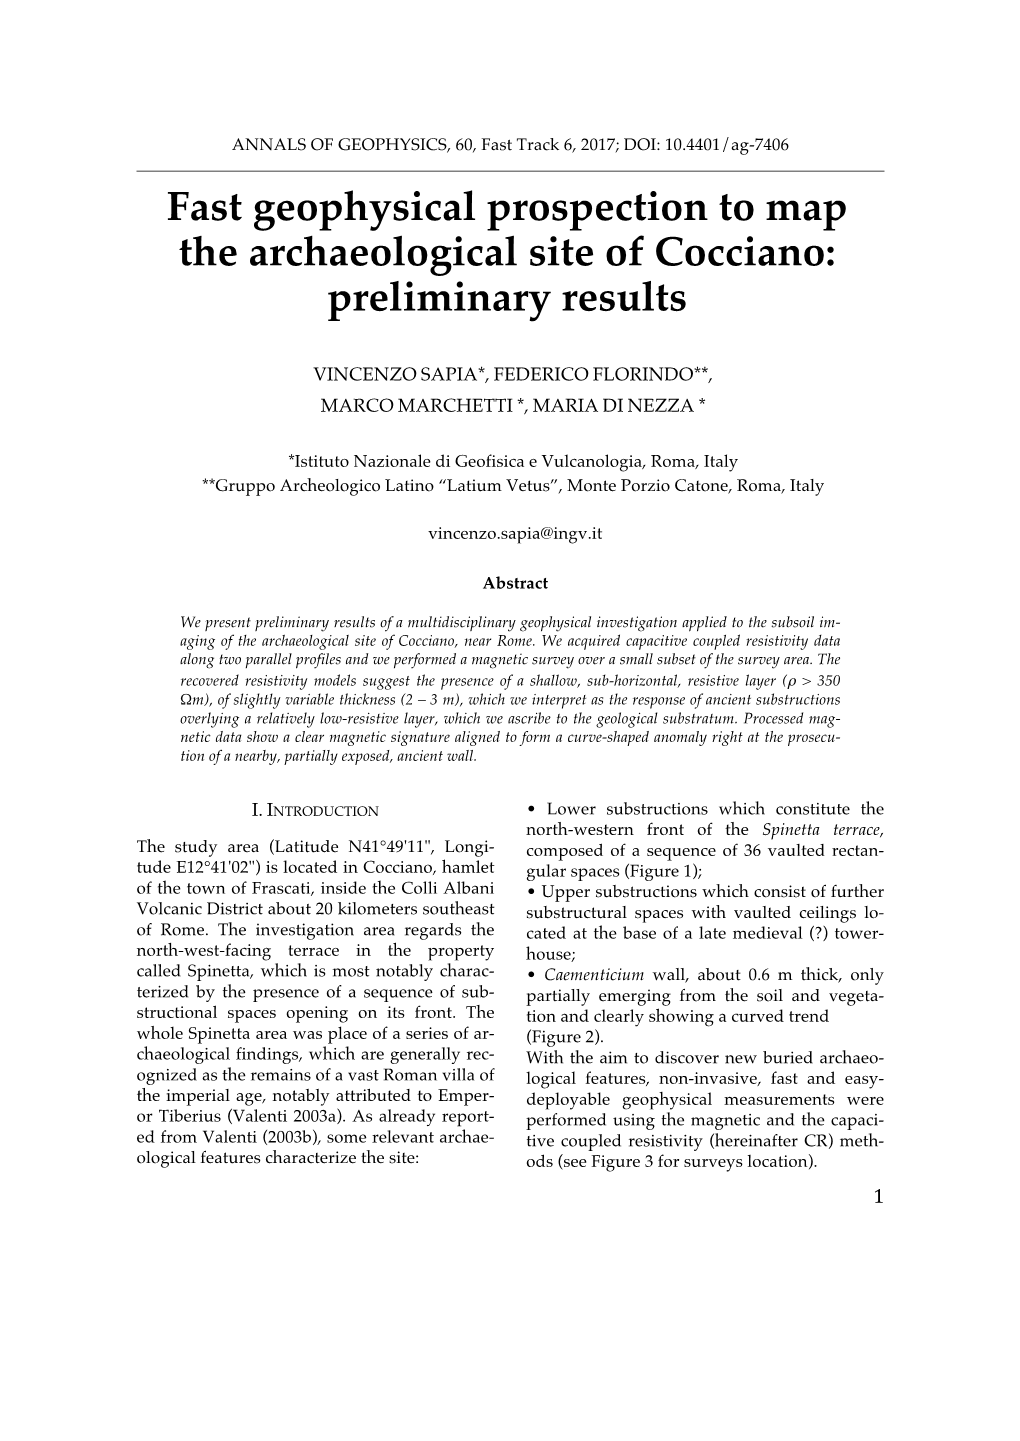 Fast Geophysical Prospection to Map the Archaeological Site of Cocciano: Preliminary Results